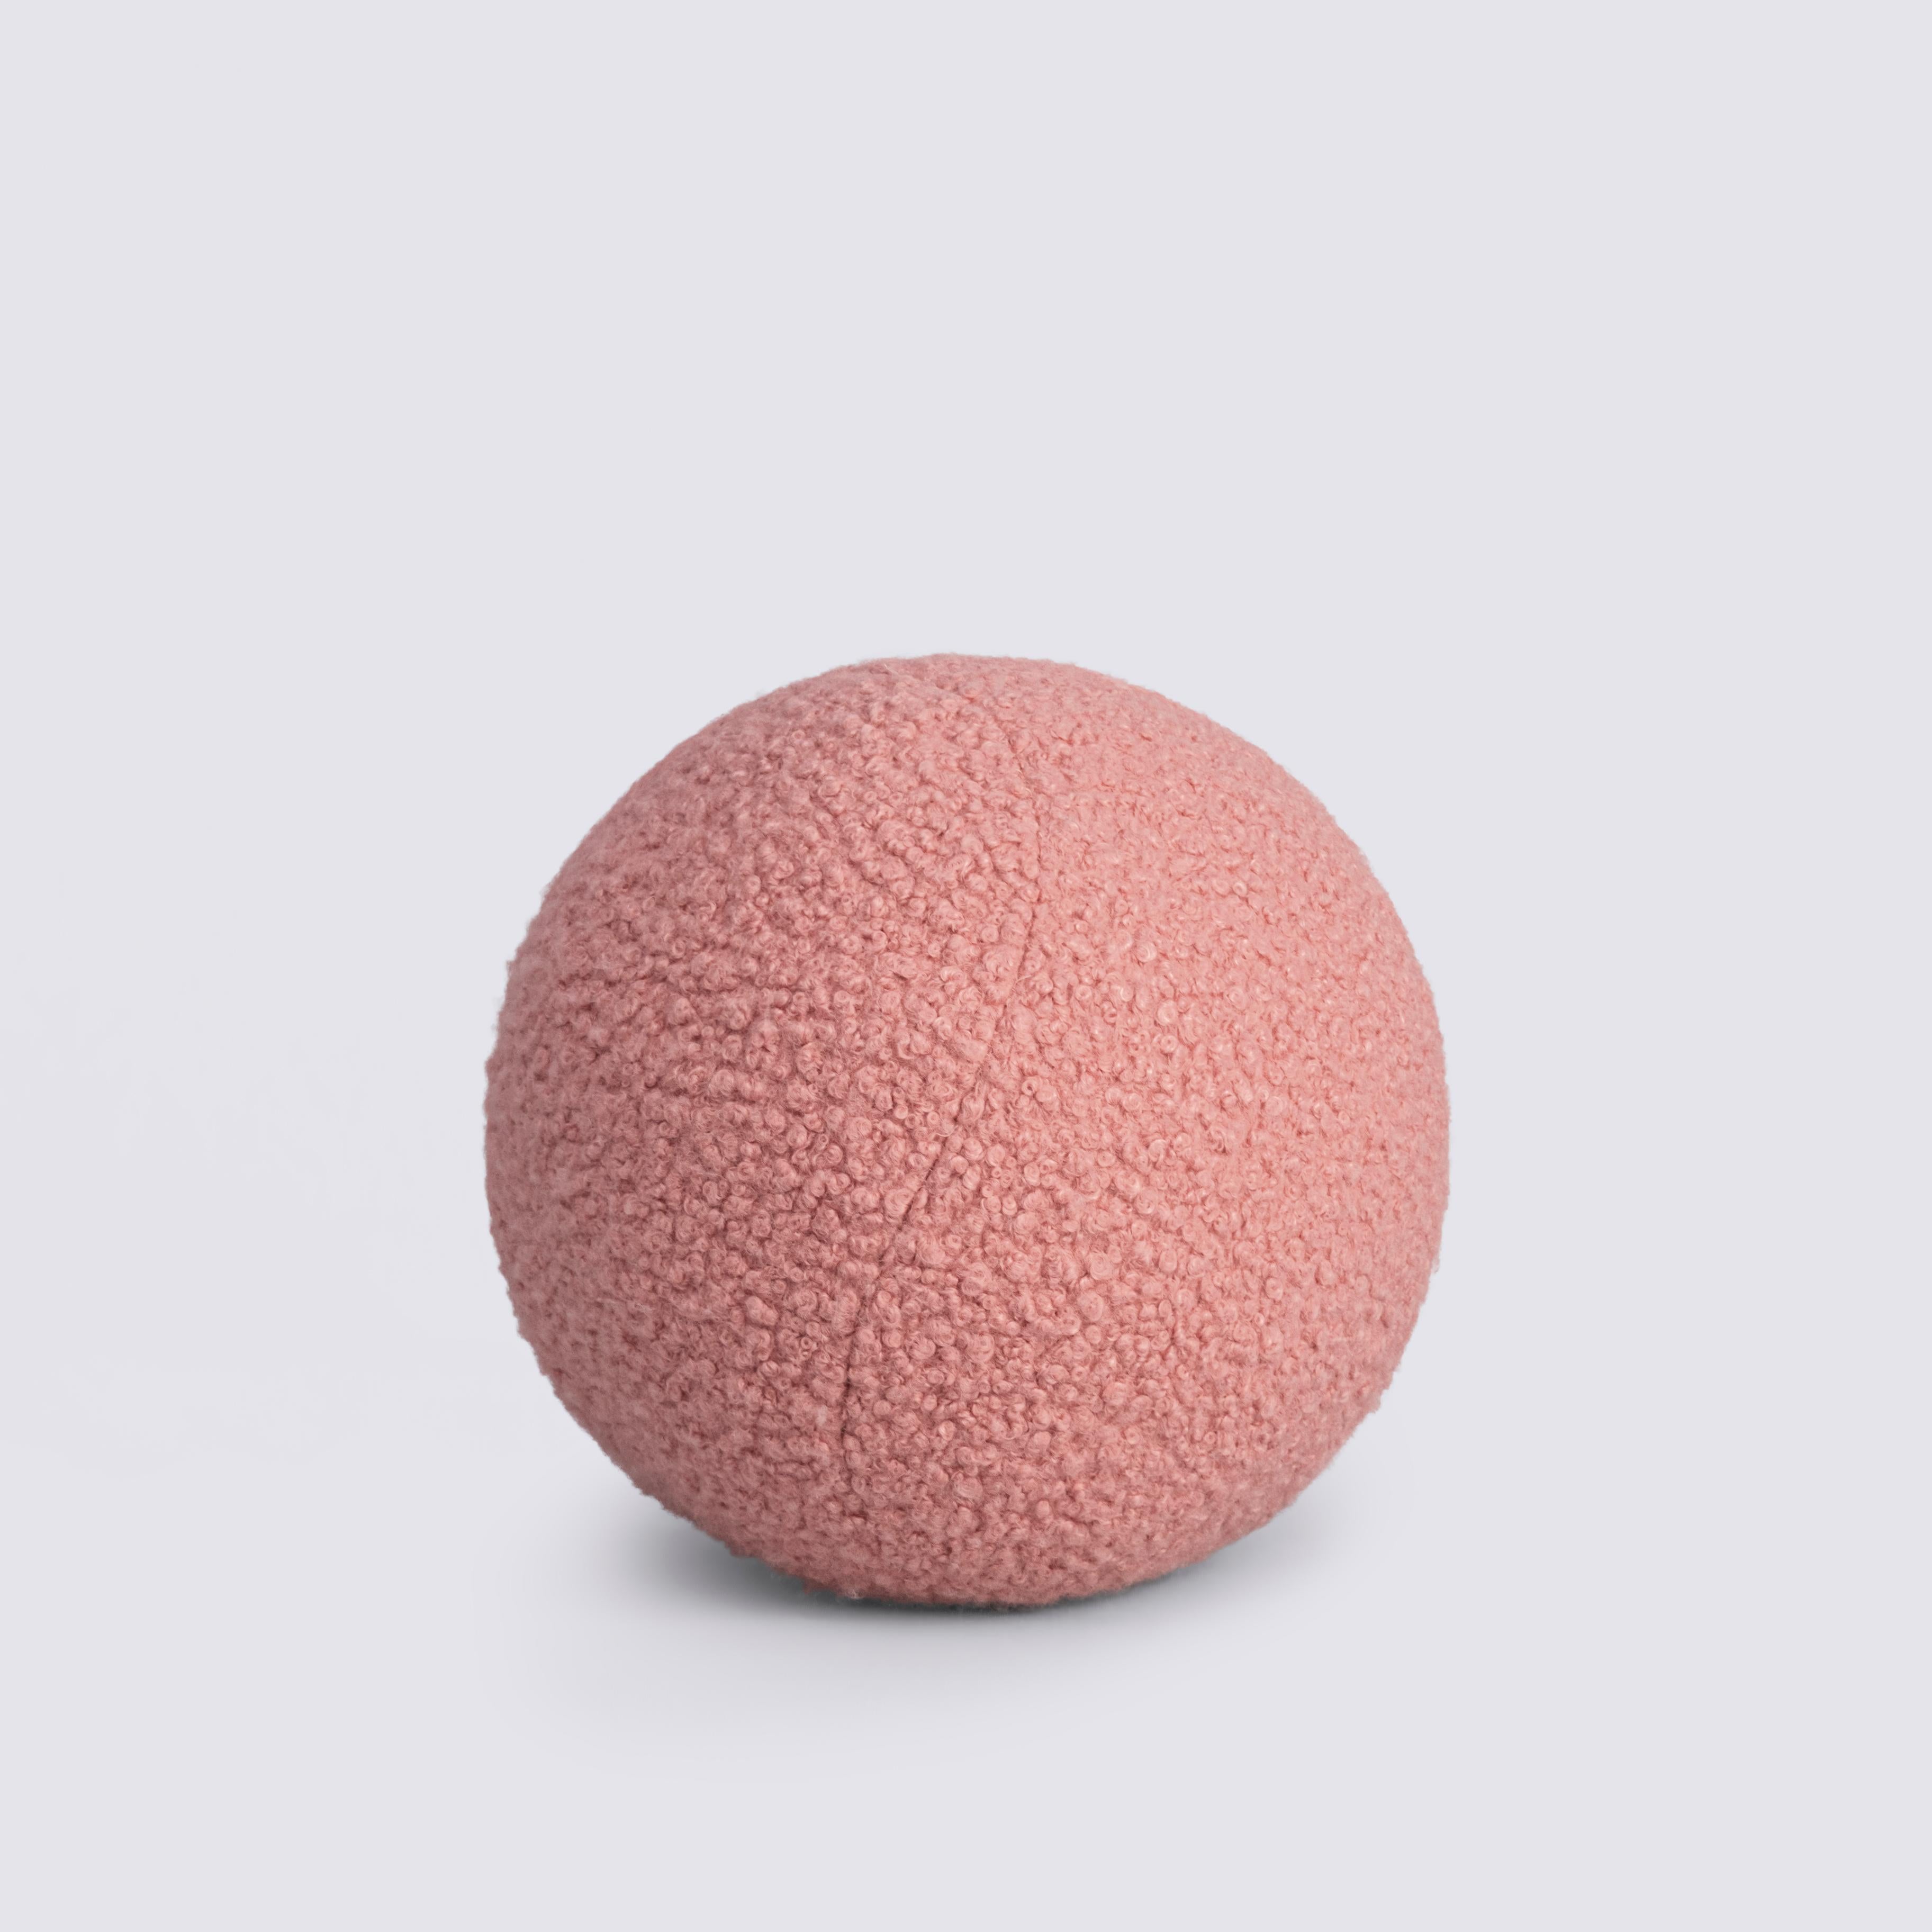 Ball cushion from Mas Creations by Masquespacio
Dimensions: D 30 cm
Materials: krimmer wool, polyester hollow fiber

The ball cushion is another new item of our collection. A cushion with the form of a ball that shows Mas Creations’ most funny